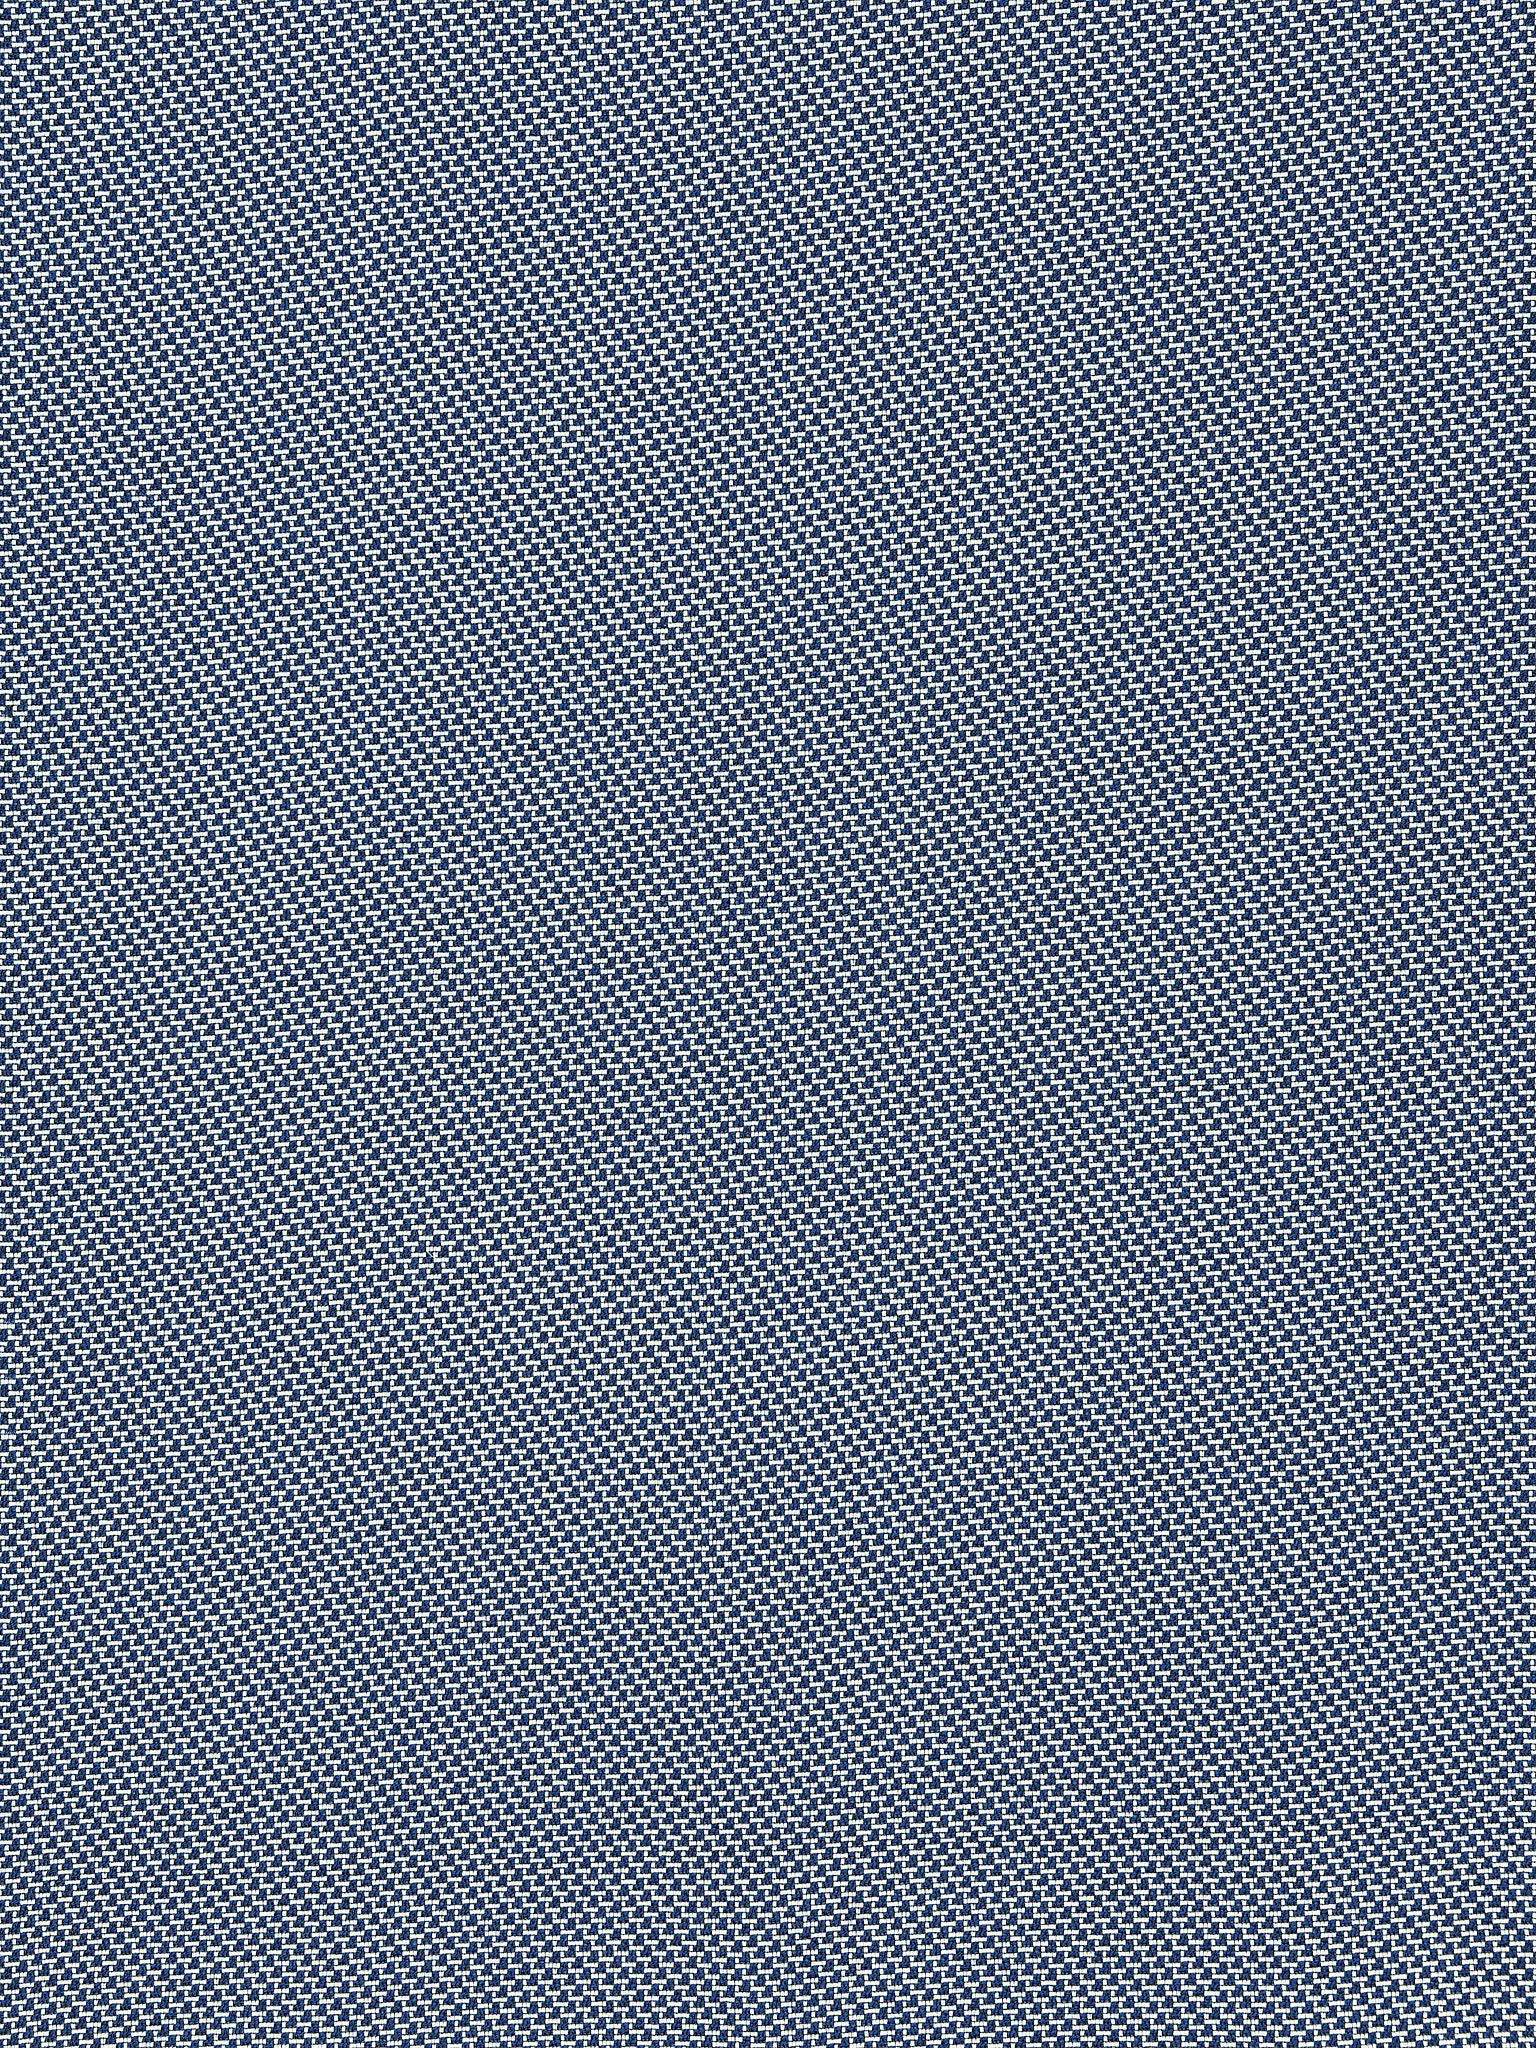 North Downs fabric in cobalt color - pattern number EY 000113ND - by Scalamandre in the Old World Weavers collection